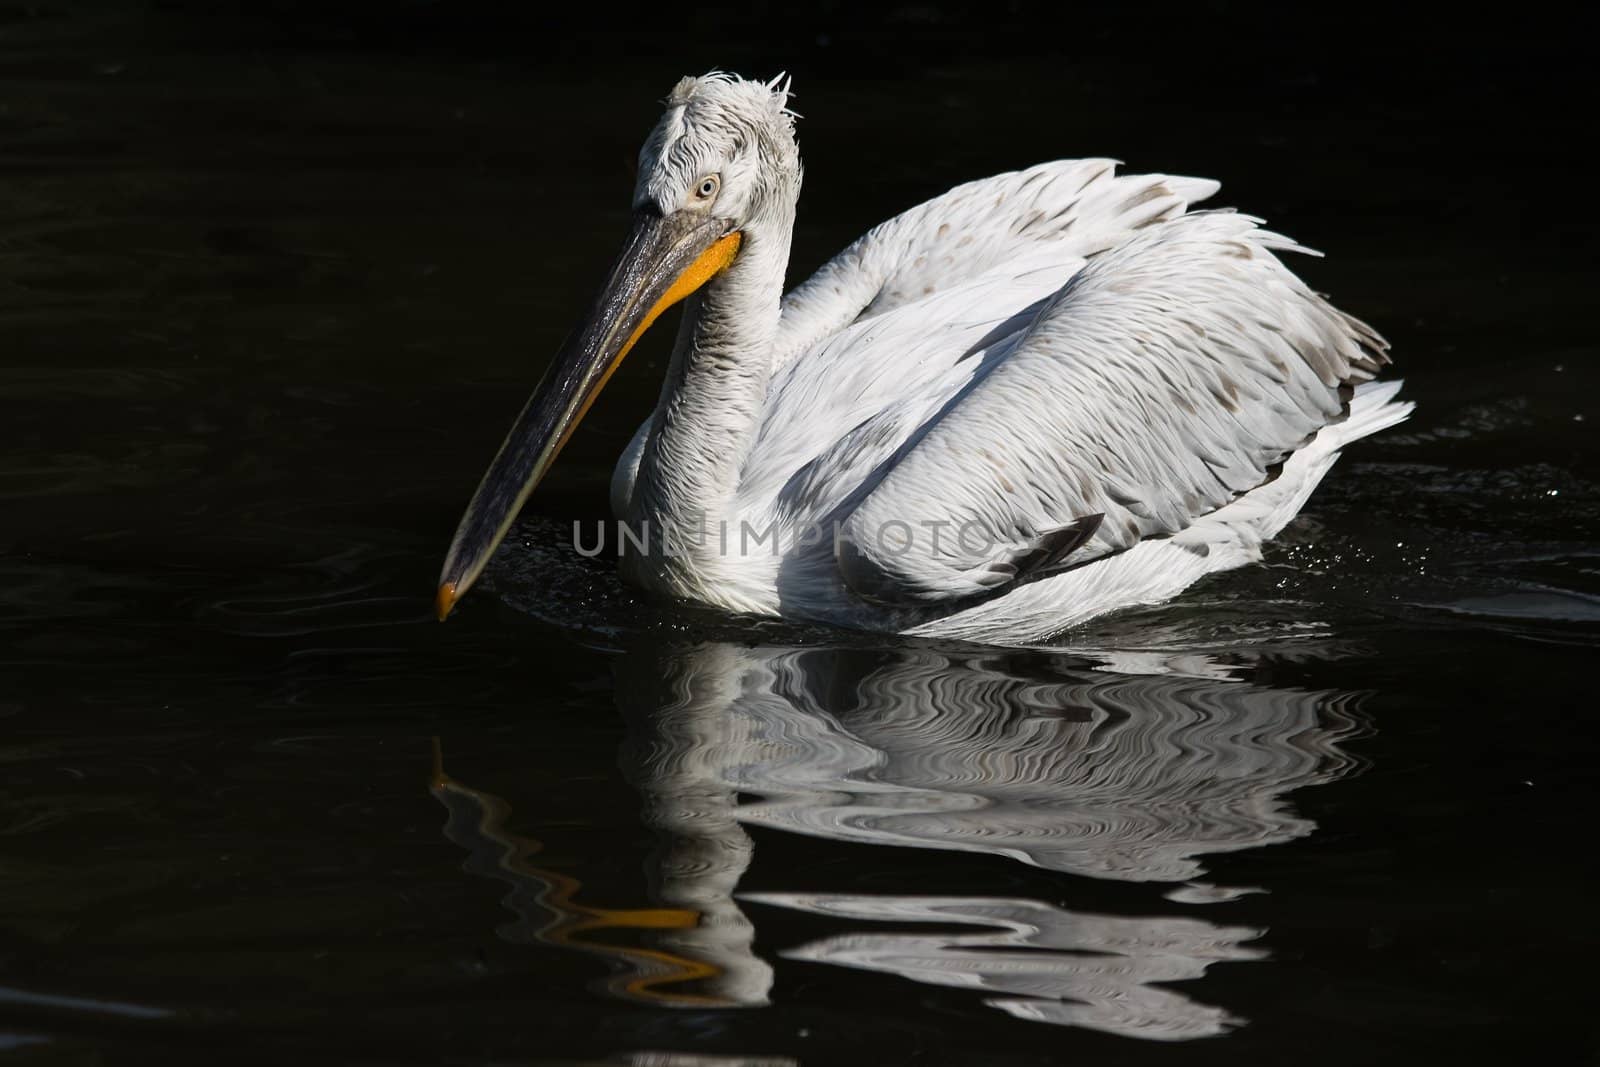 Swimming pelican by Colette